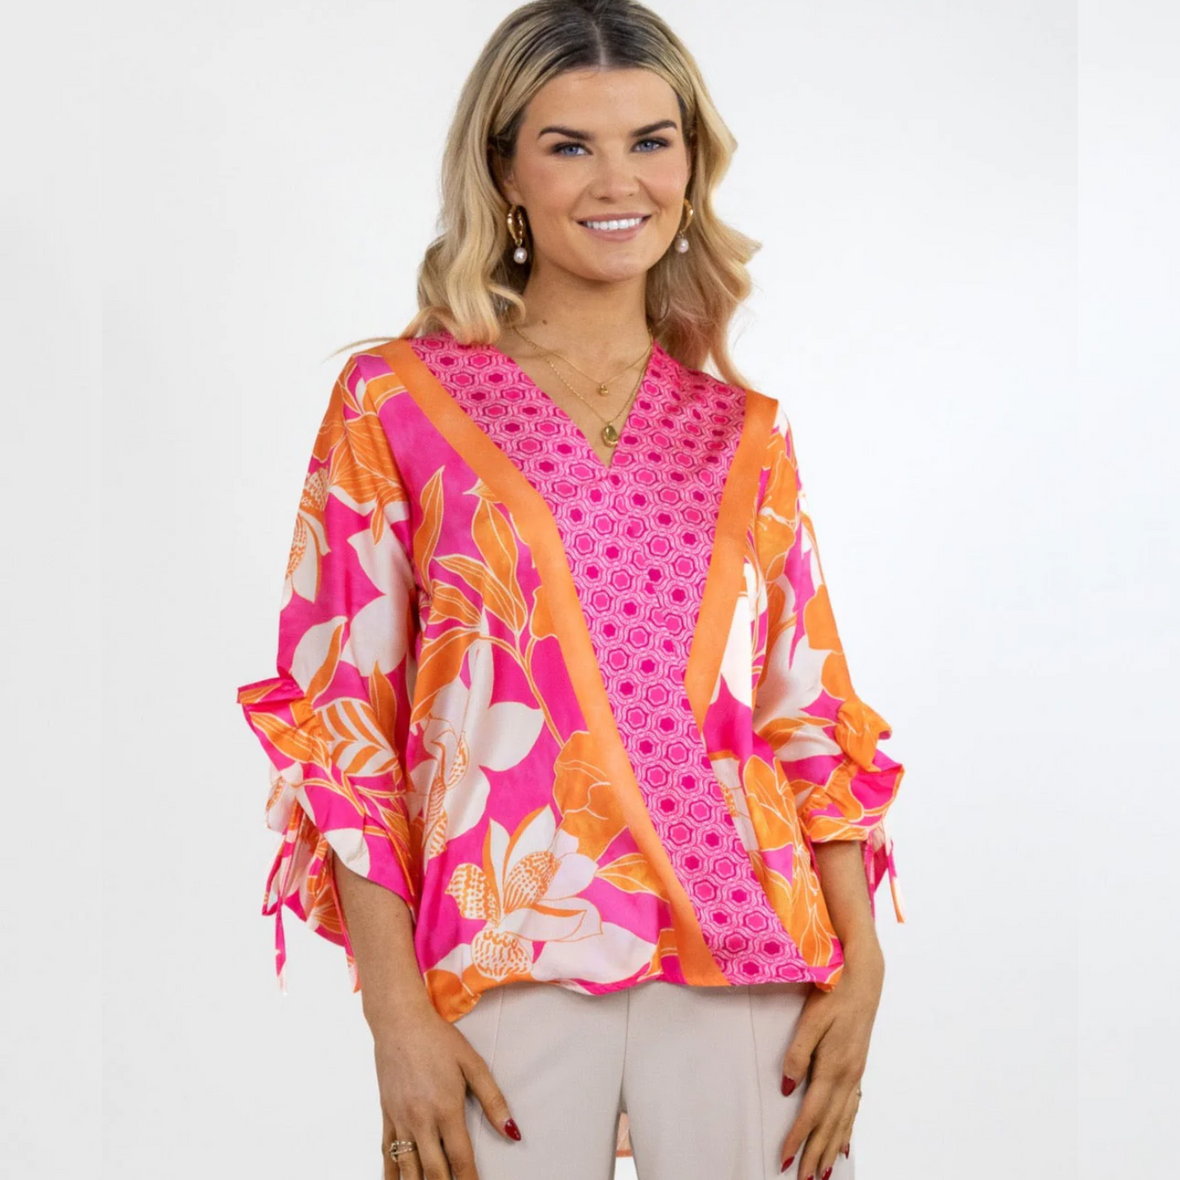 Female model smiling wearing pink and orange floral top